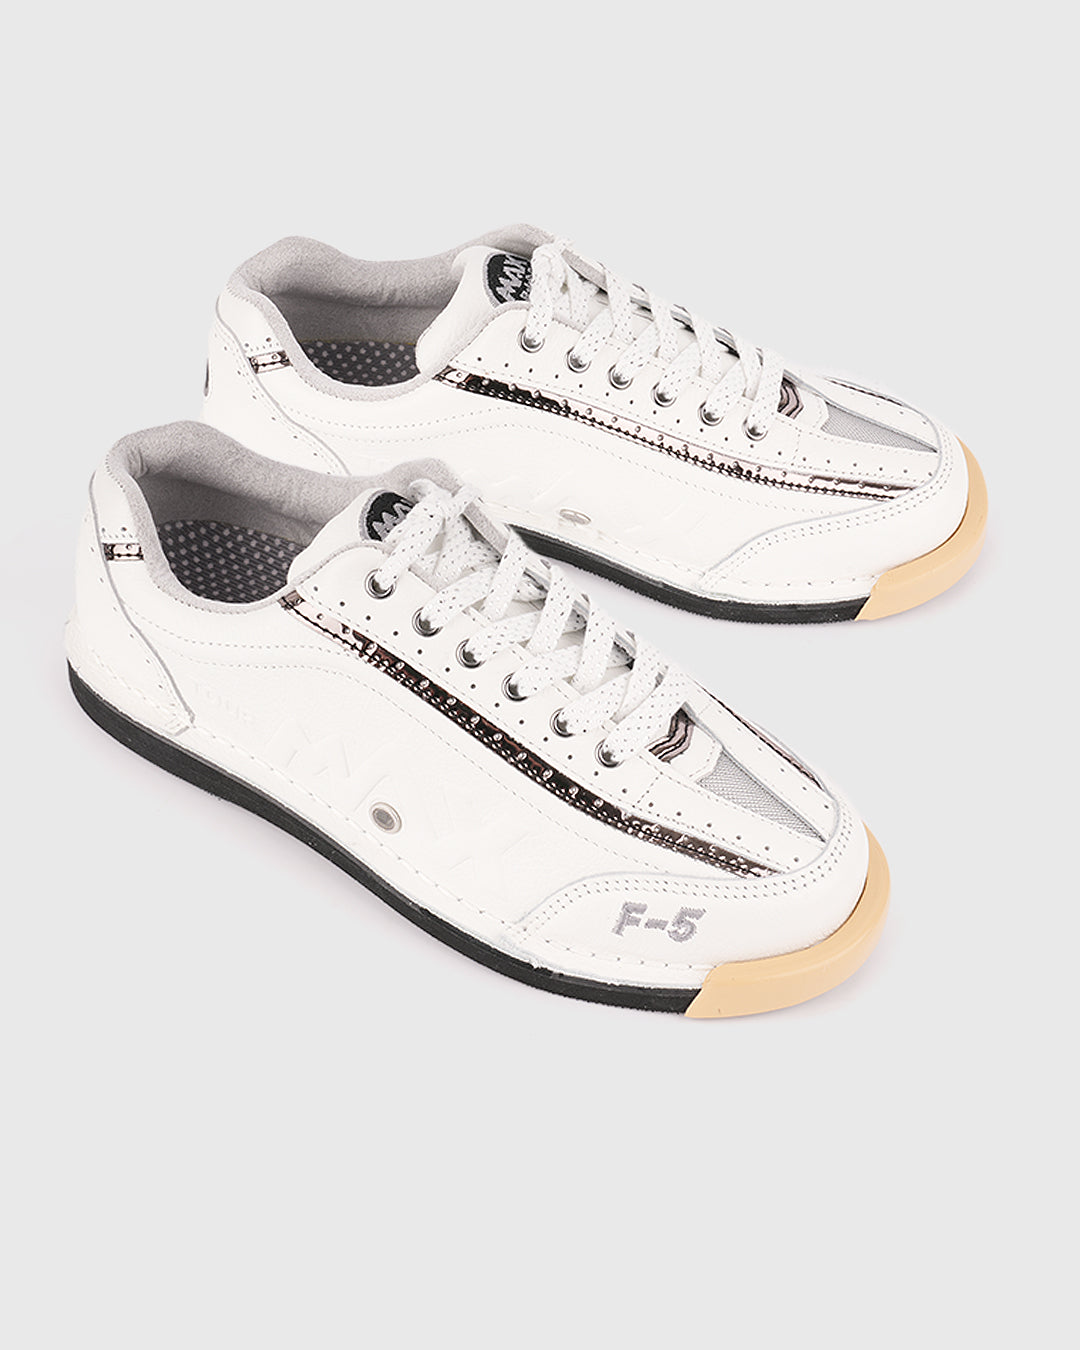 maxwelter maxrise f-5 f5 bowling shoes white lifestyle